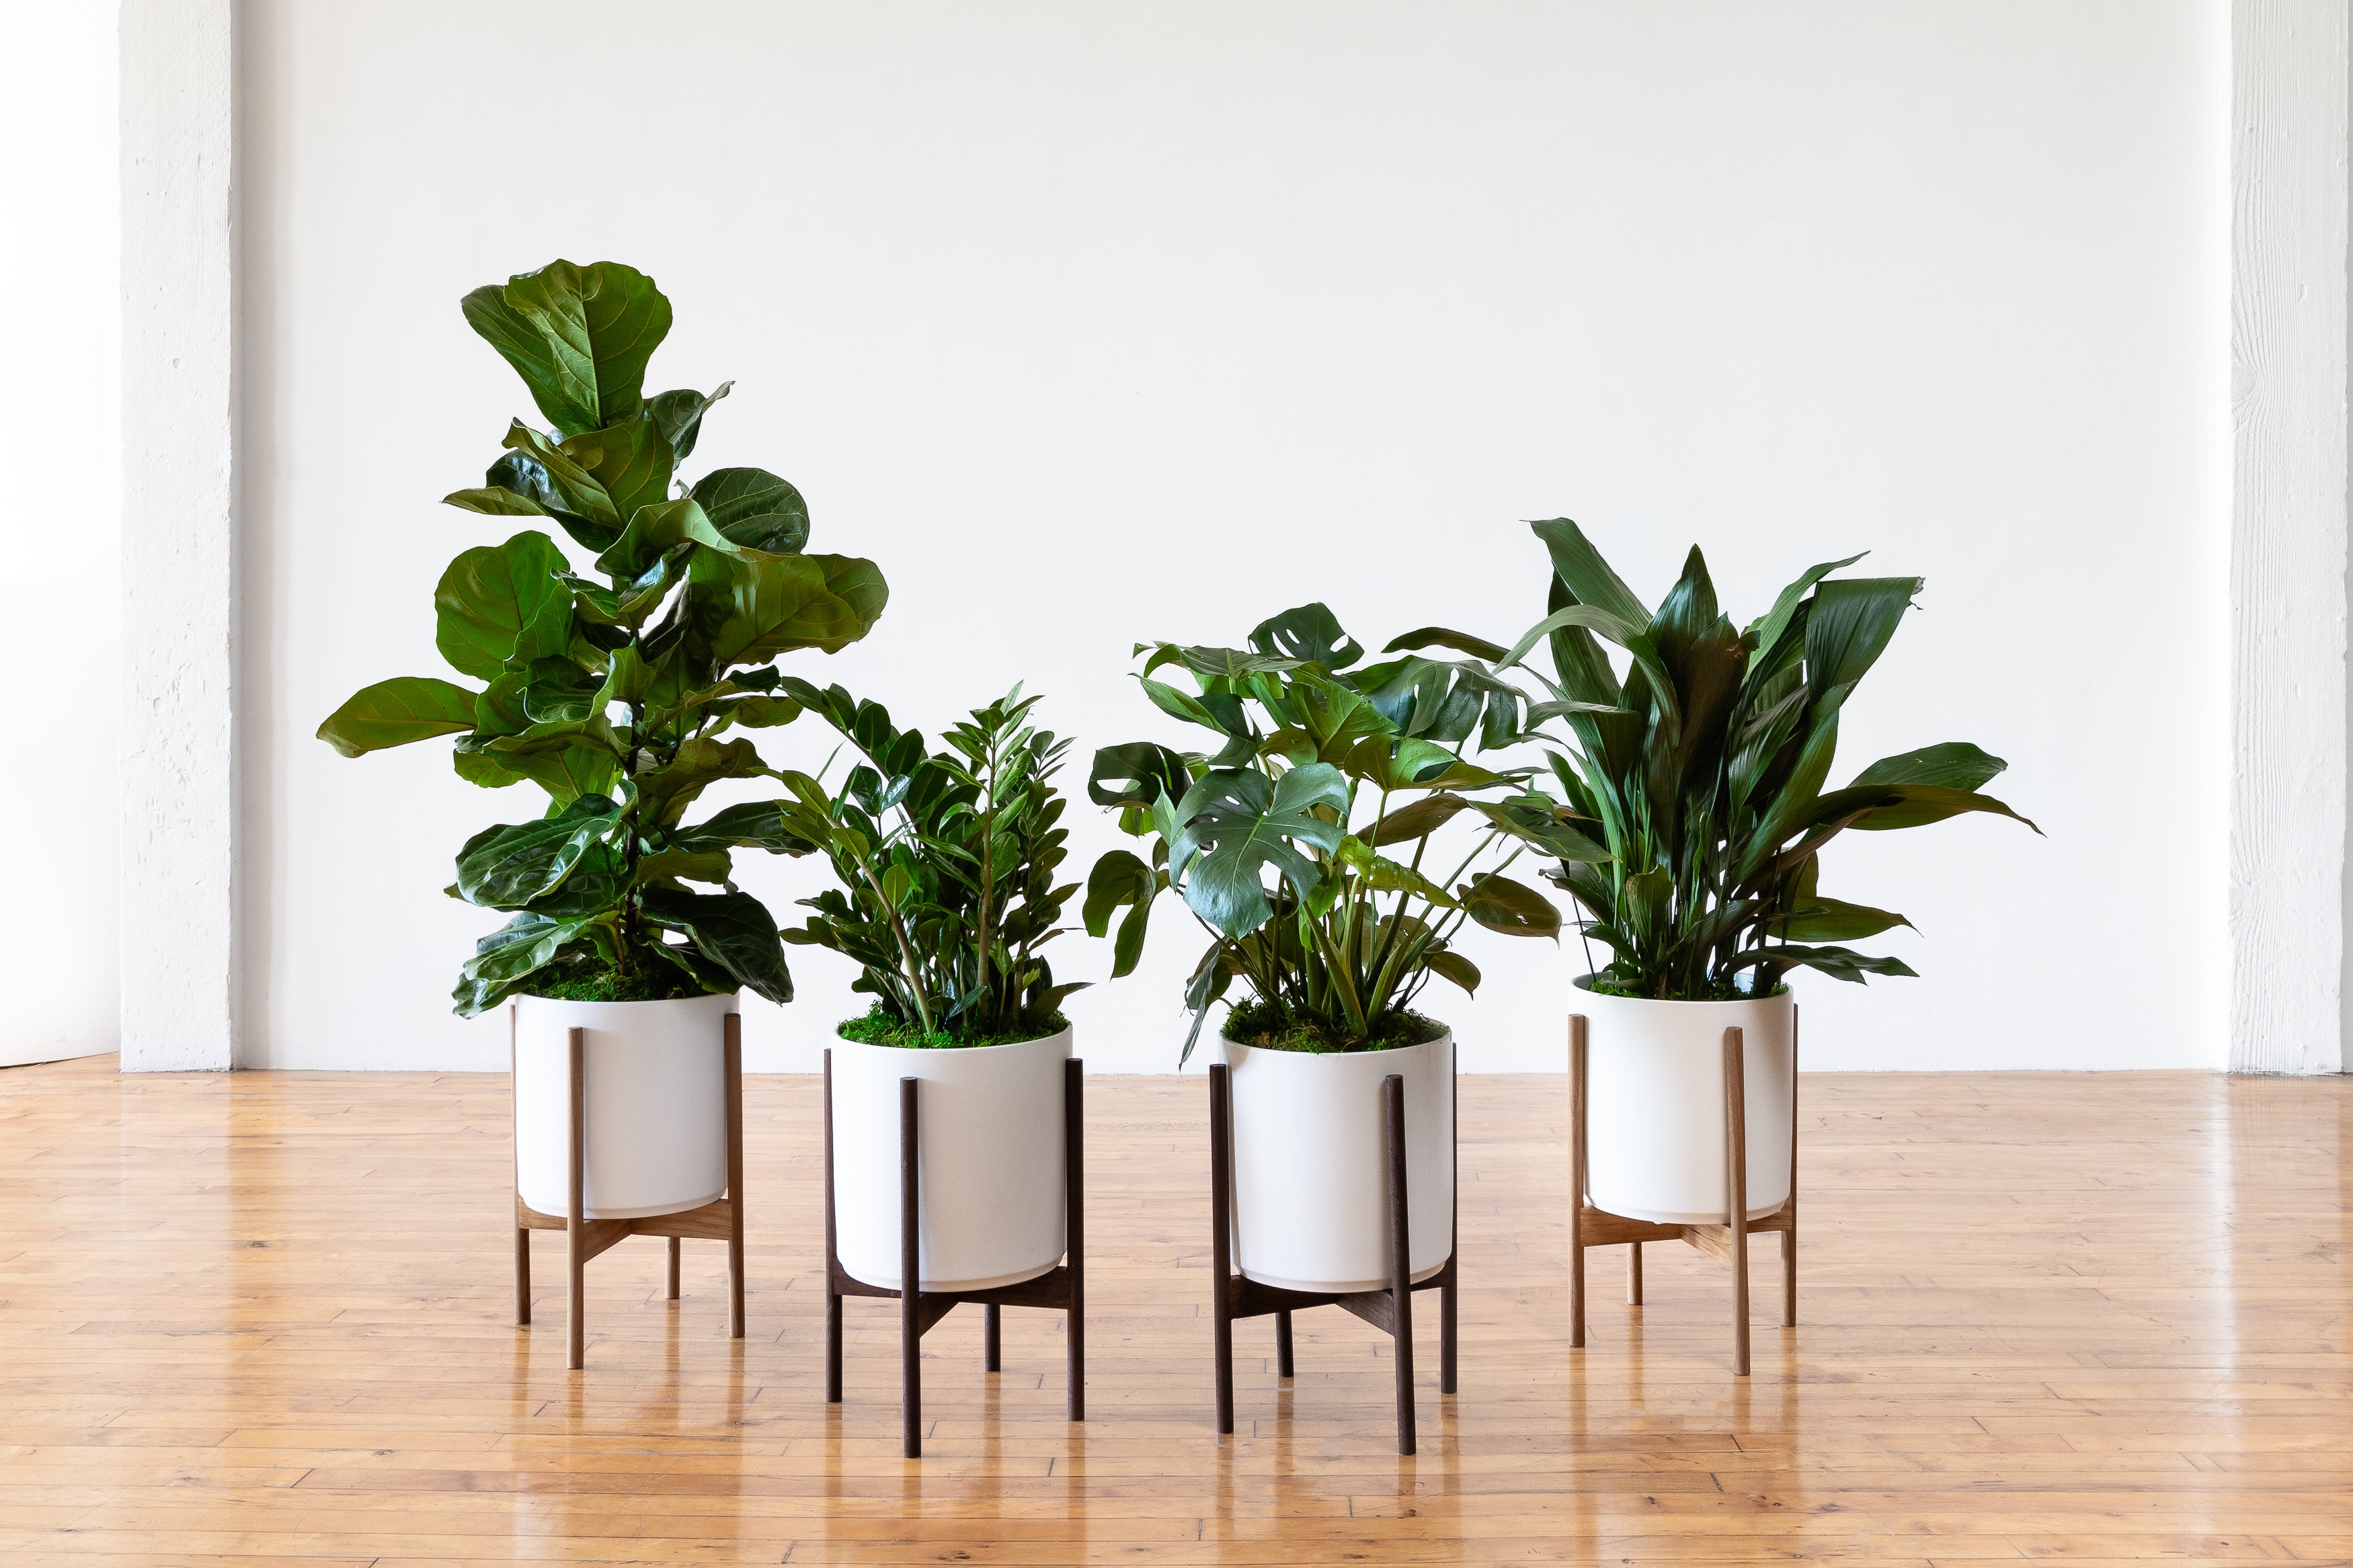 Brighten Up Your Home This Winter With These Indoor Plants